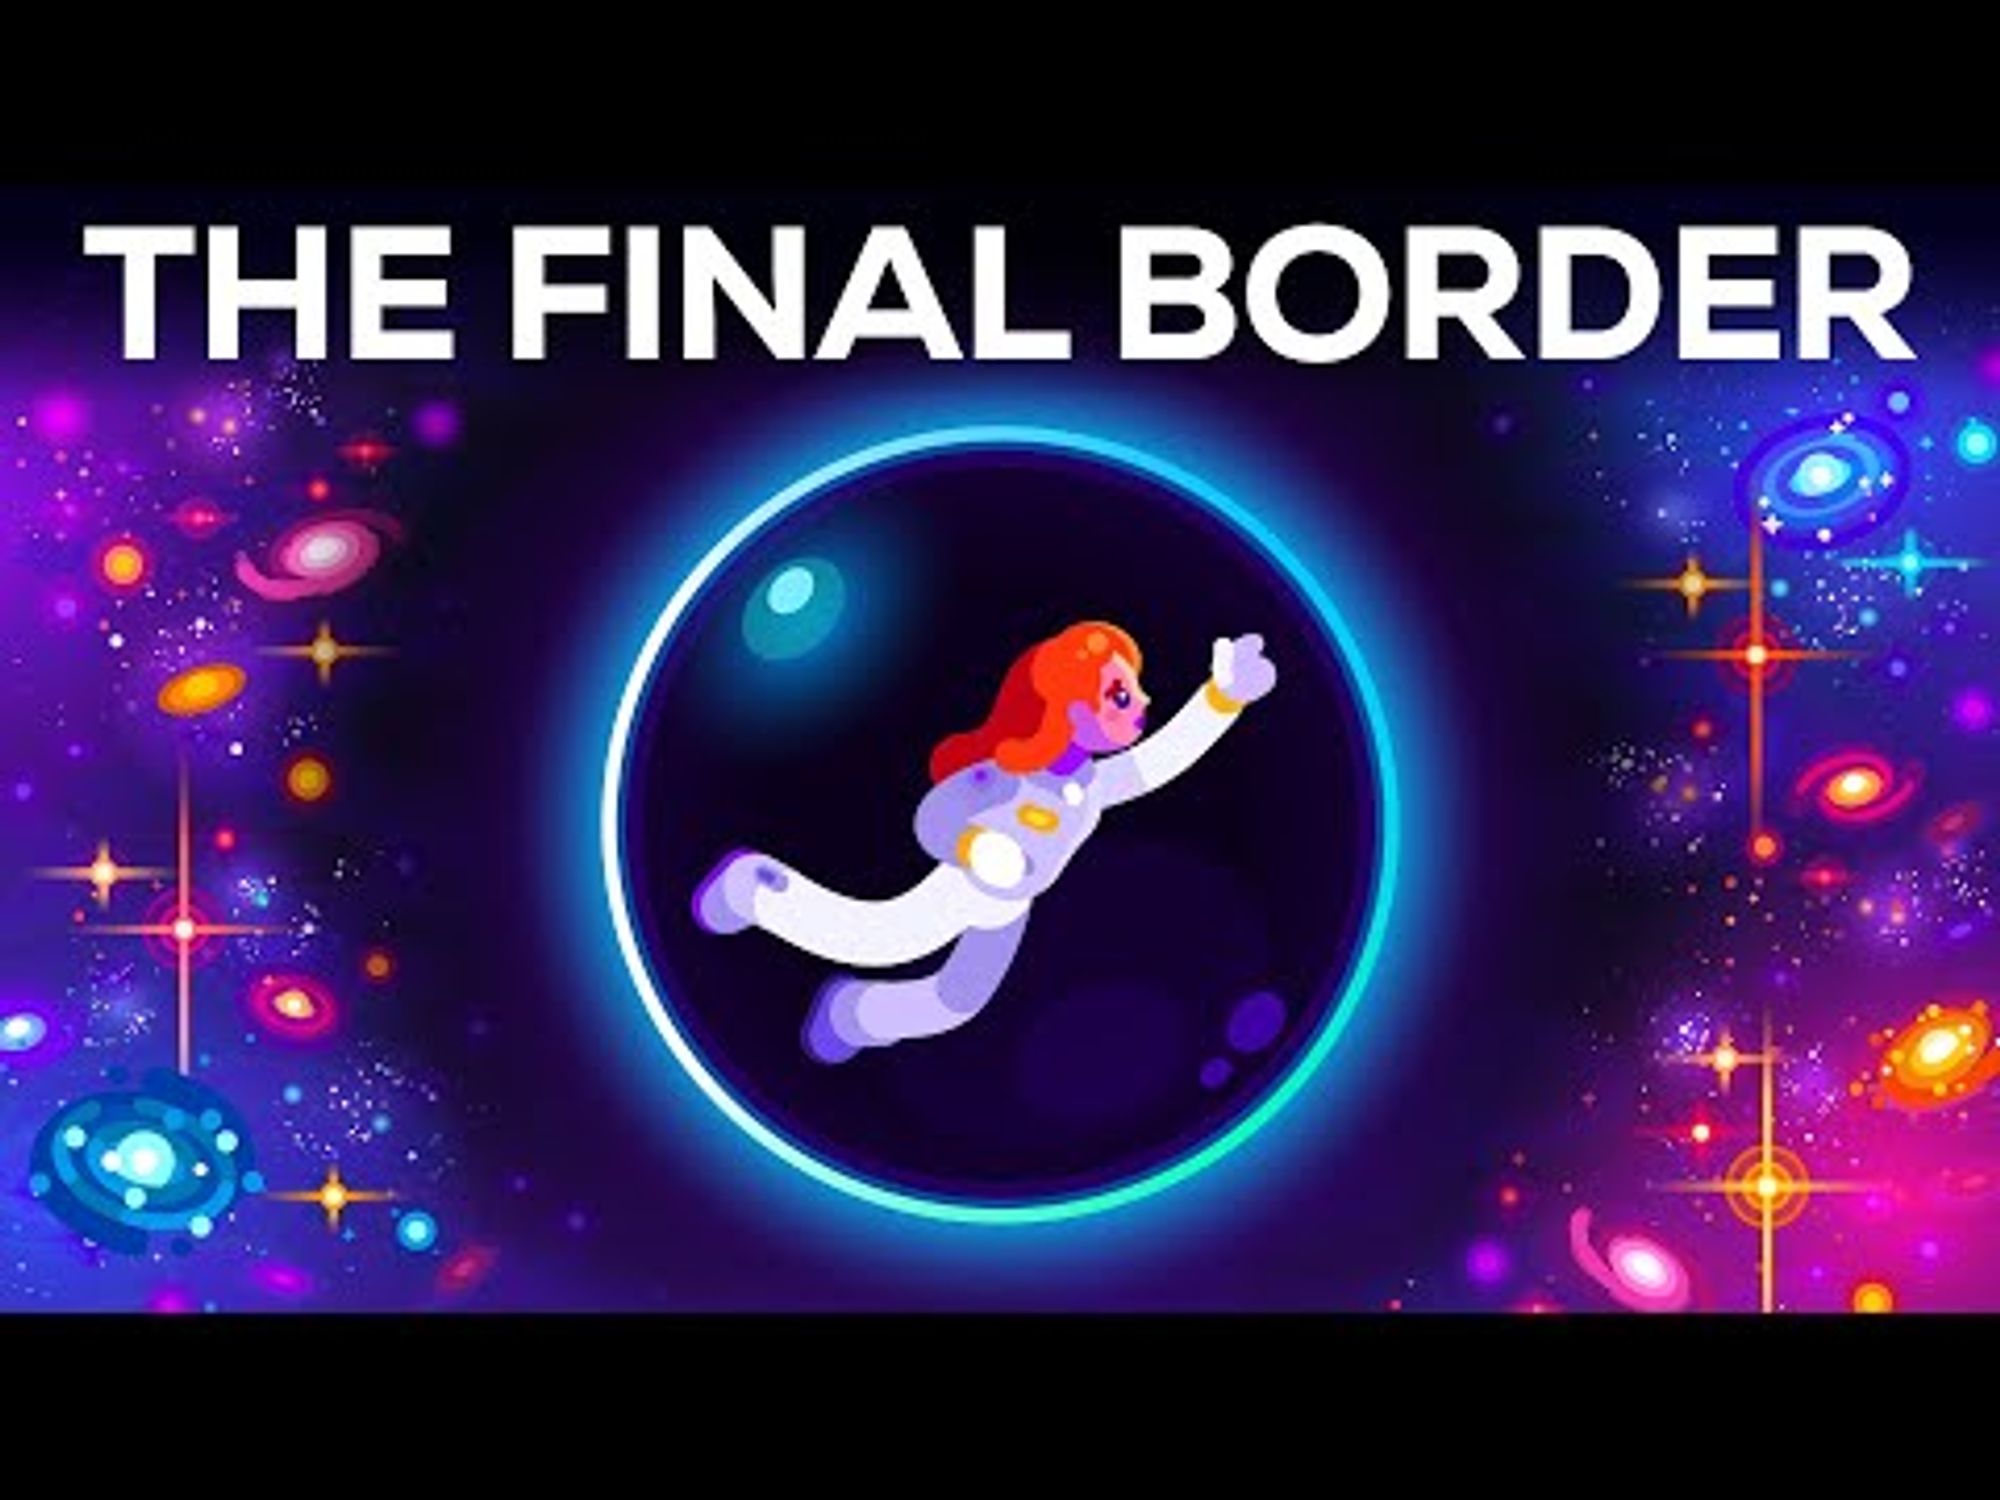 TRUE Limits Of Humanity - The Final Border We Will Never Cross